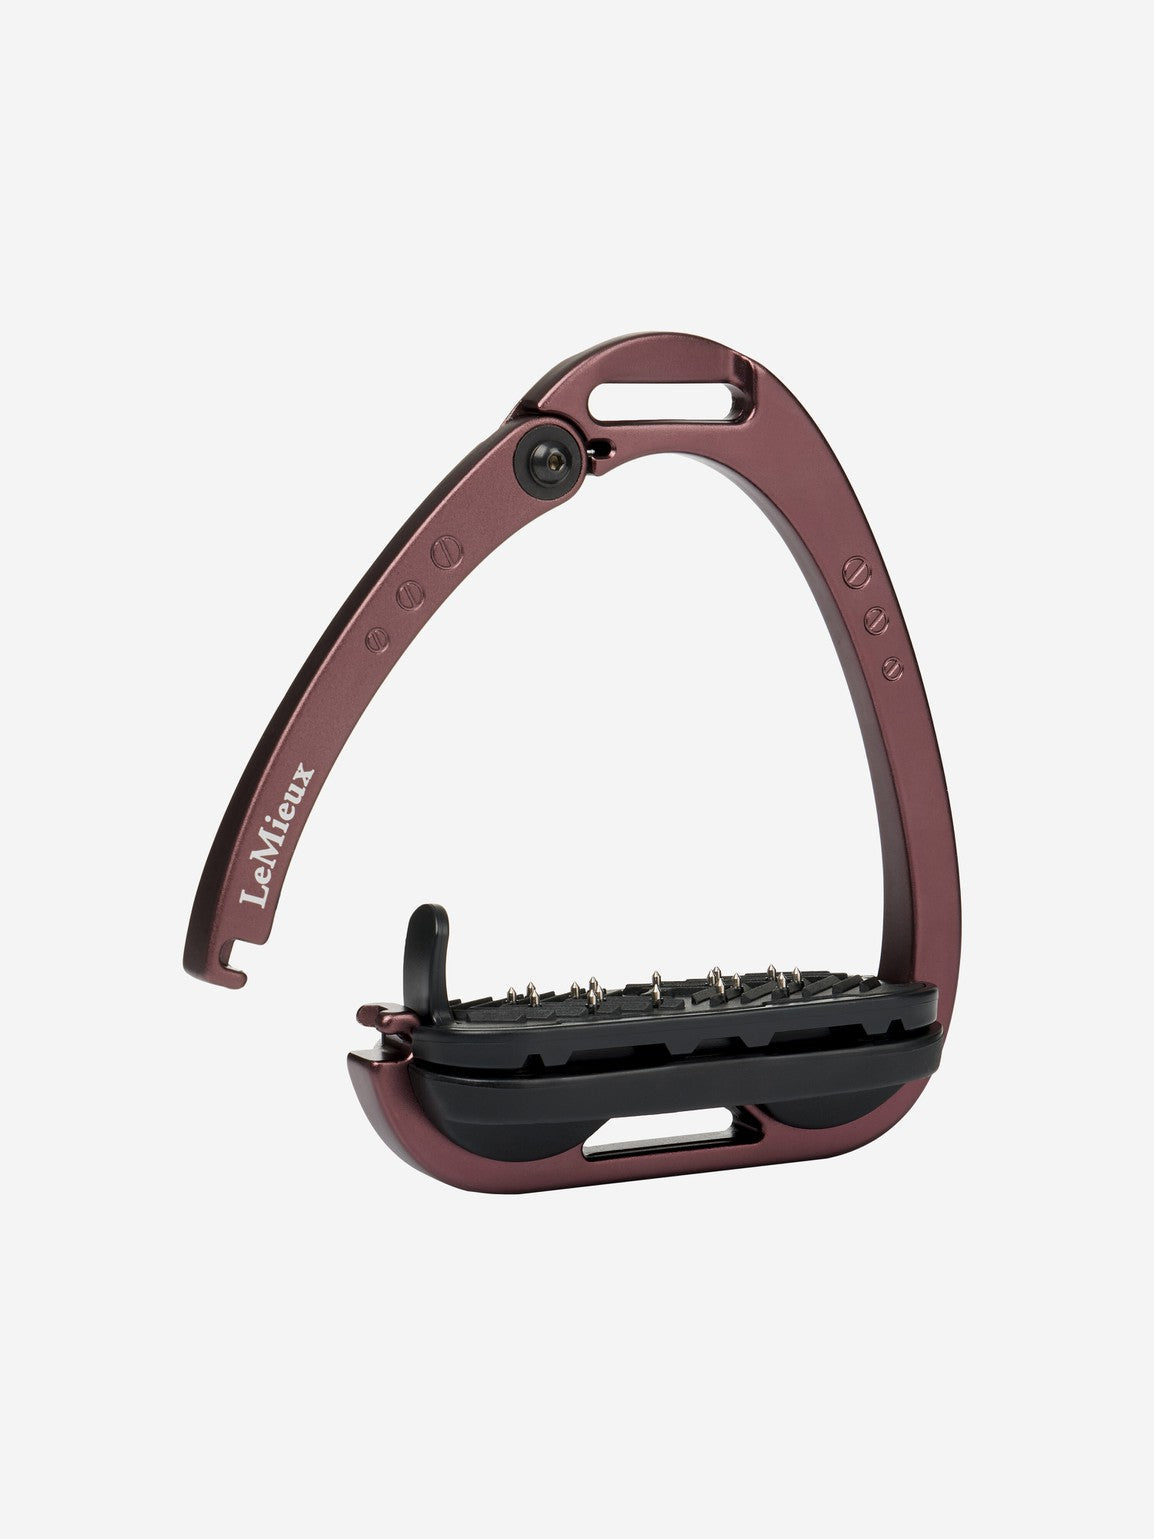 Burgundy and black stirrup leathers designed for equestrian use.